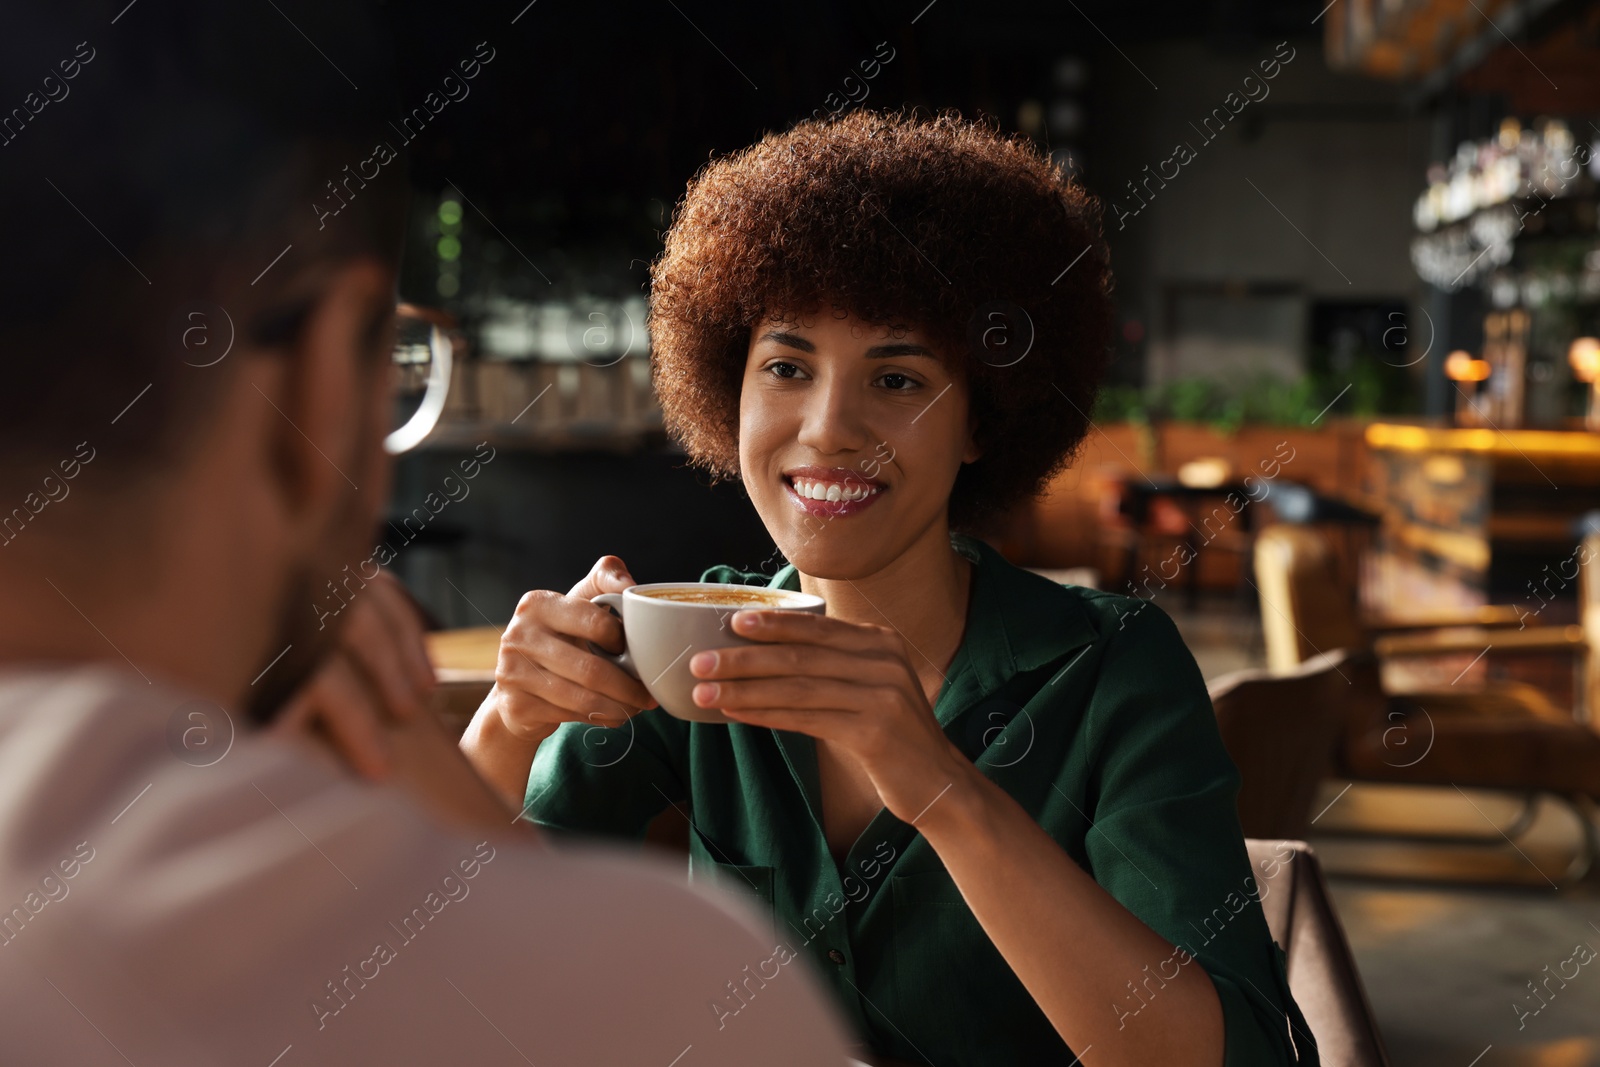 Photo of International dating. Lovely couple spending time together in cafe